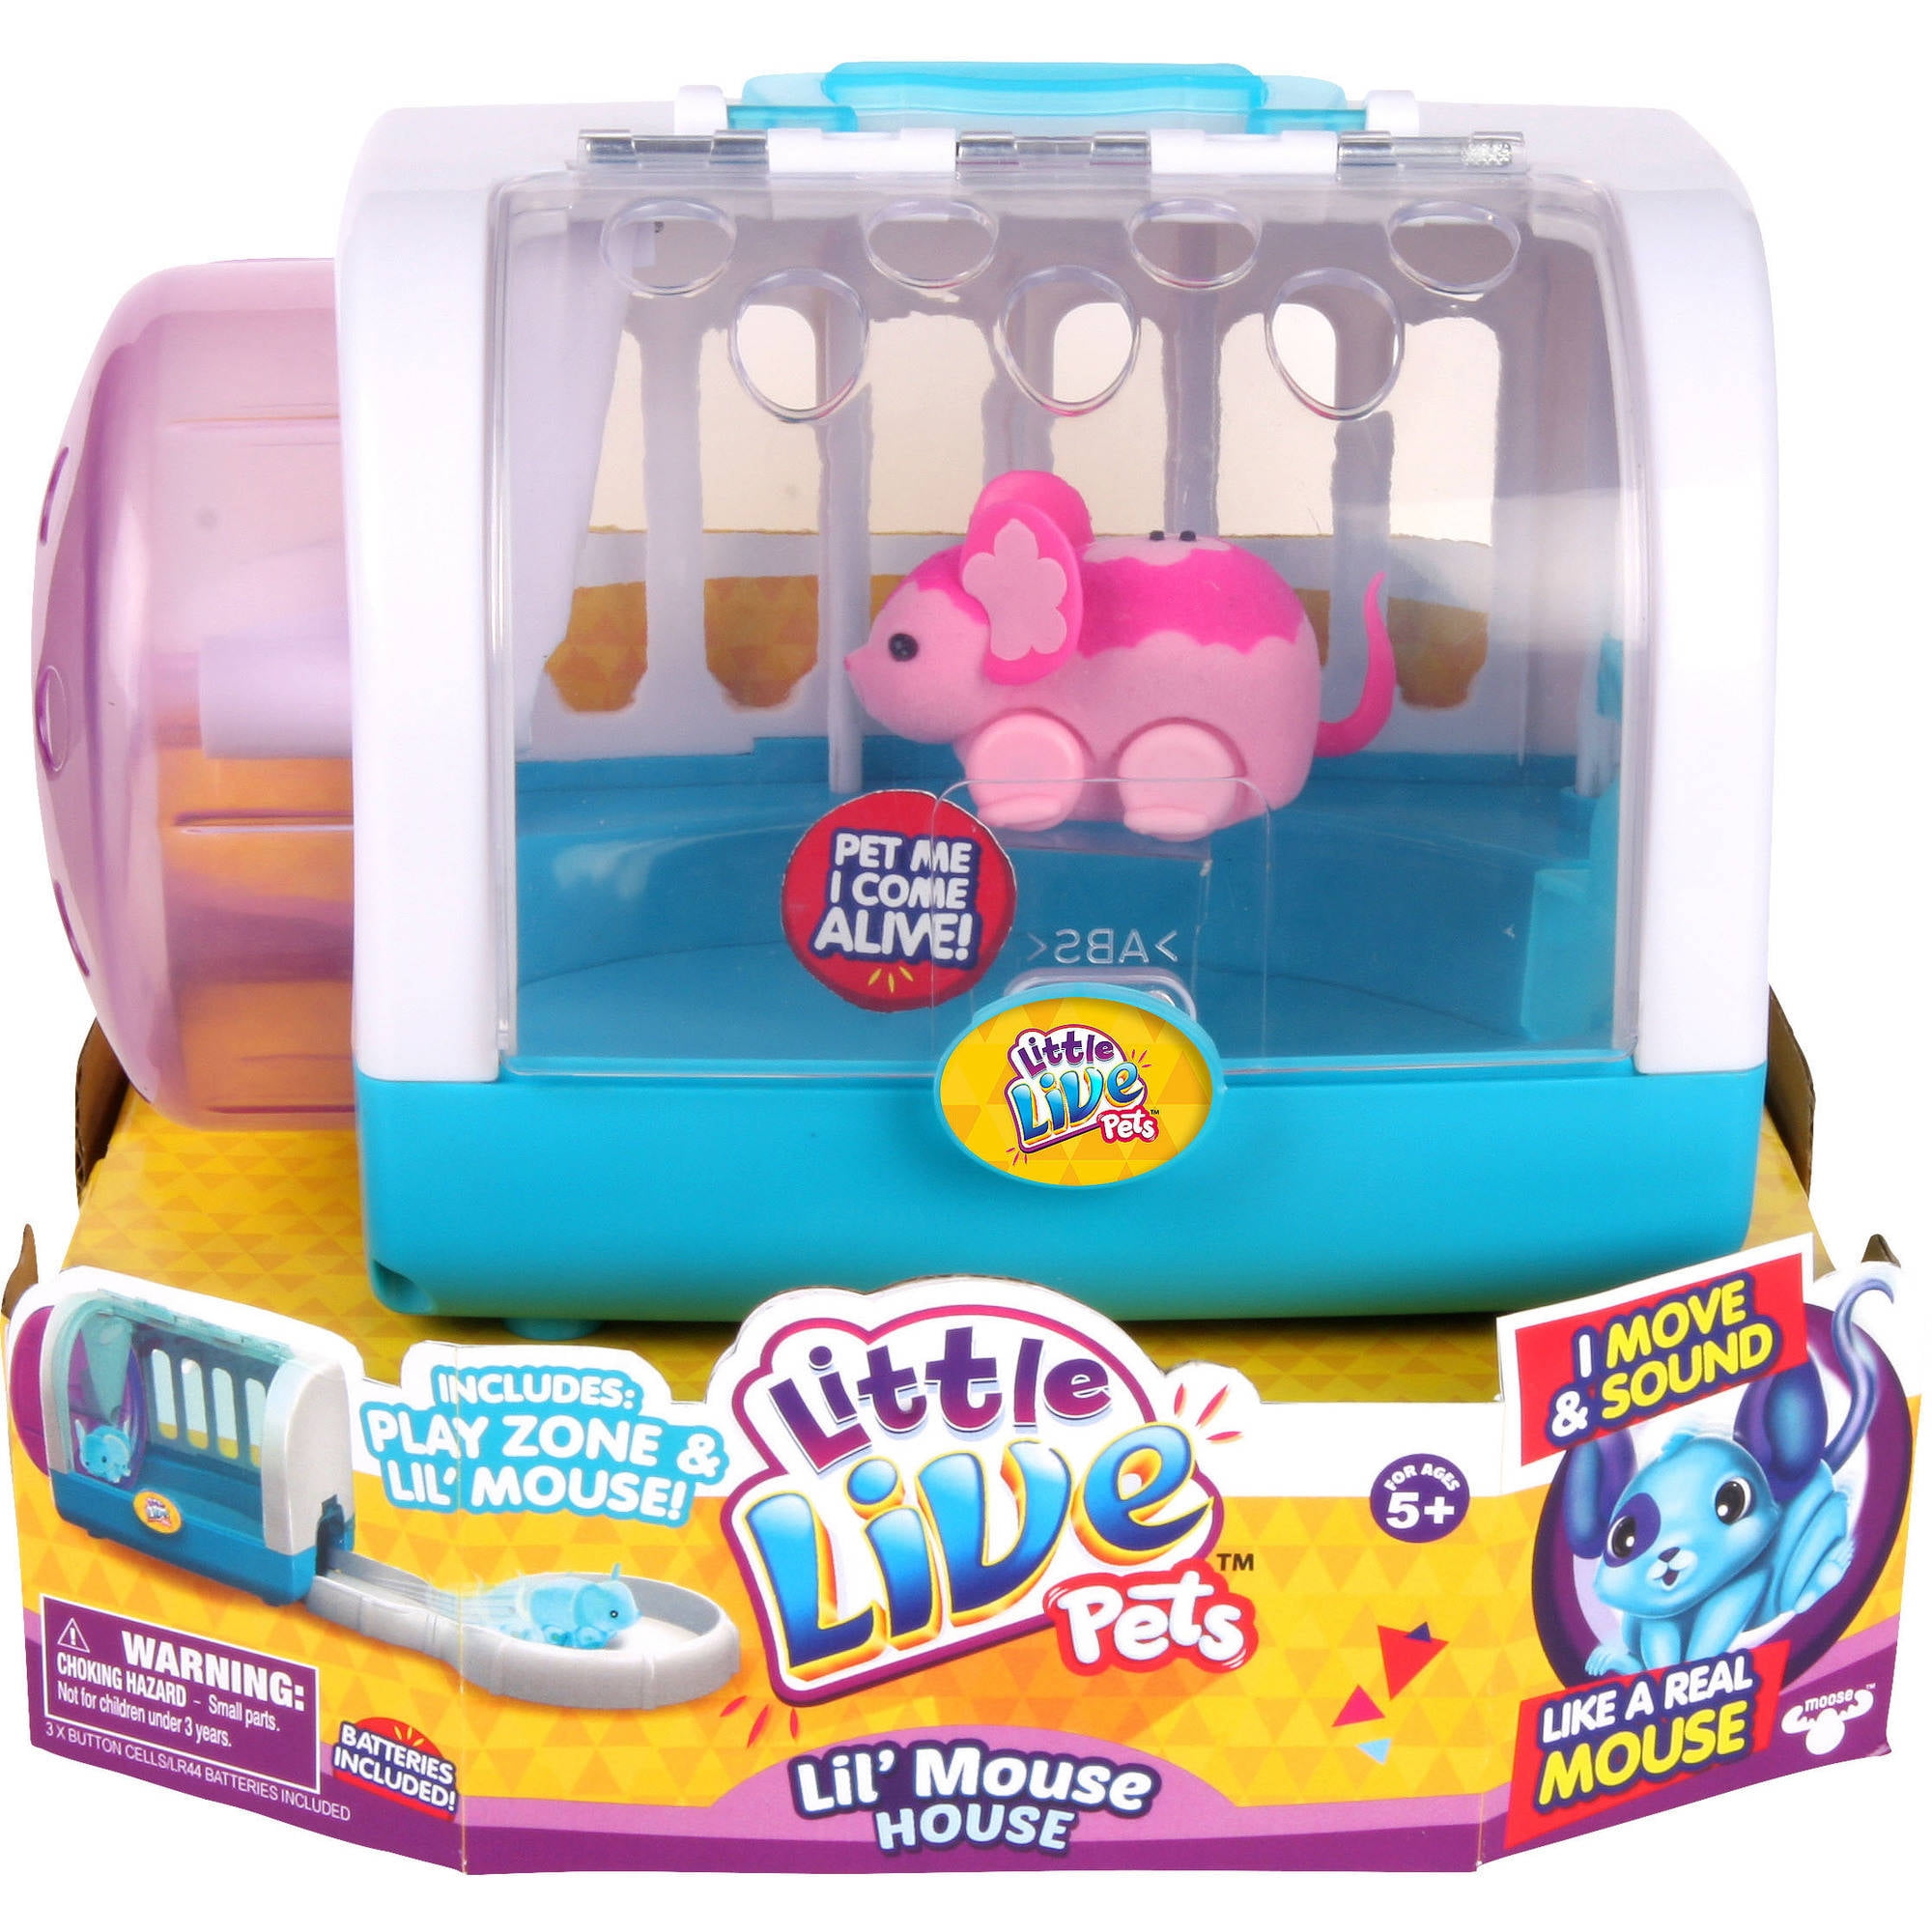 Little Live Pets S2 Lil' Mouse House, Cuppi-Swirl 